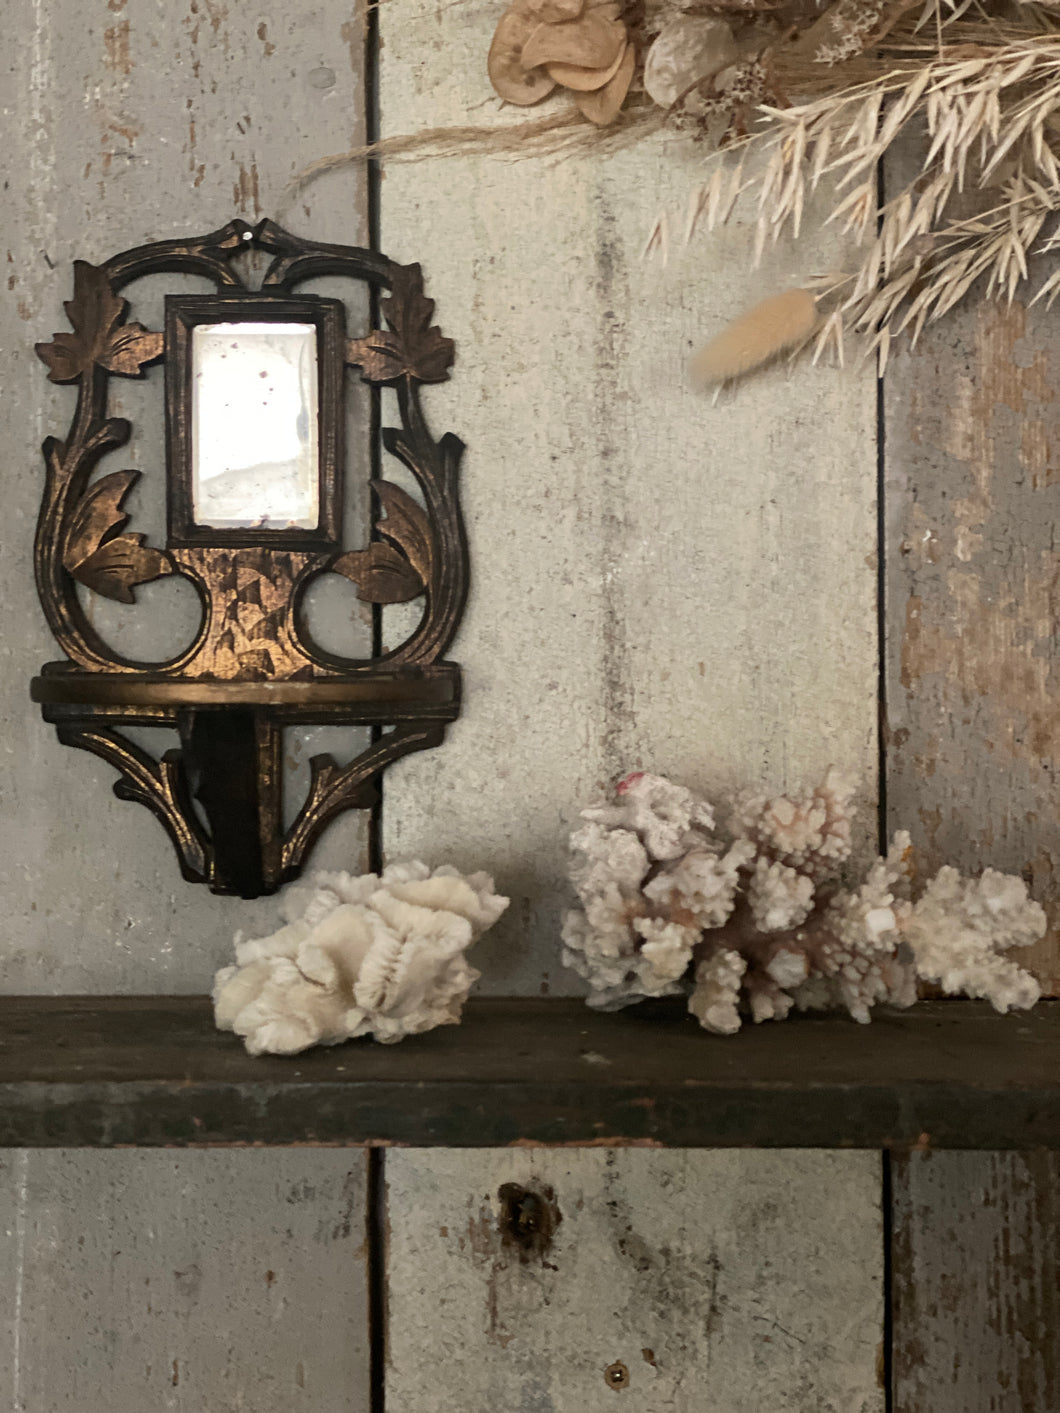 Decorative Antique Bevelled Small Wall Mirror with Shelf